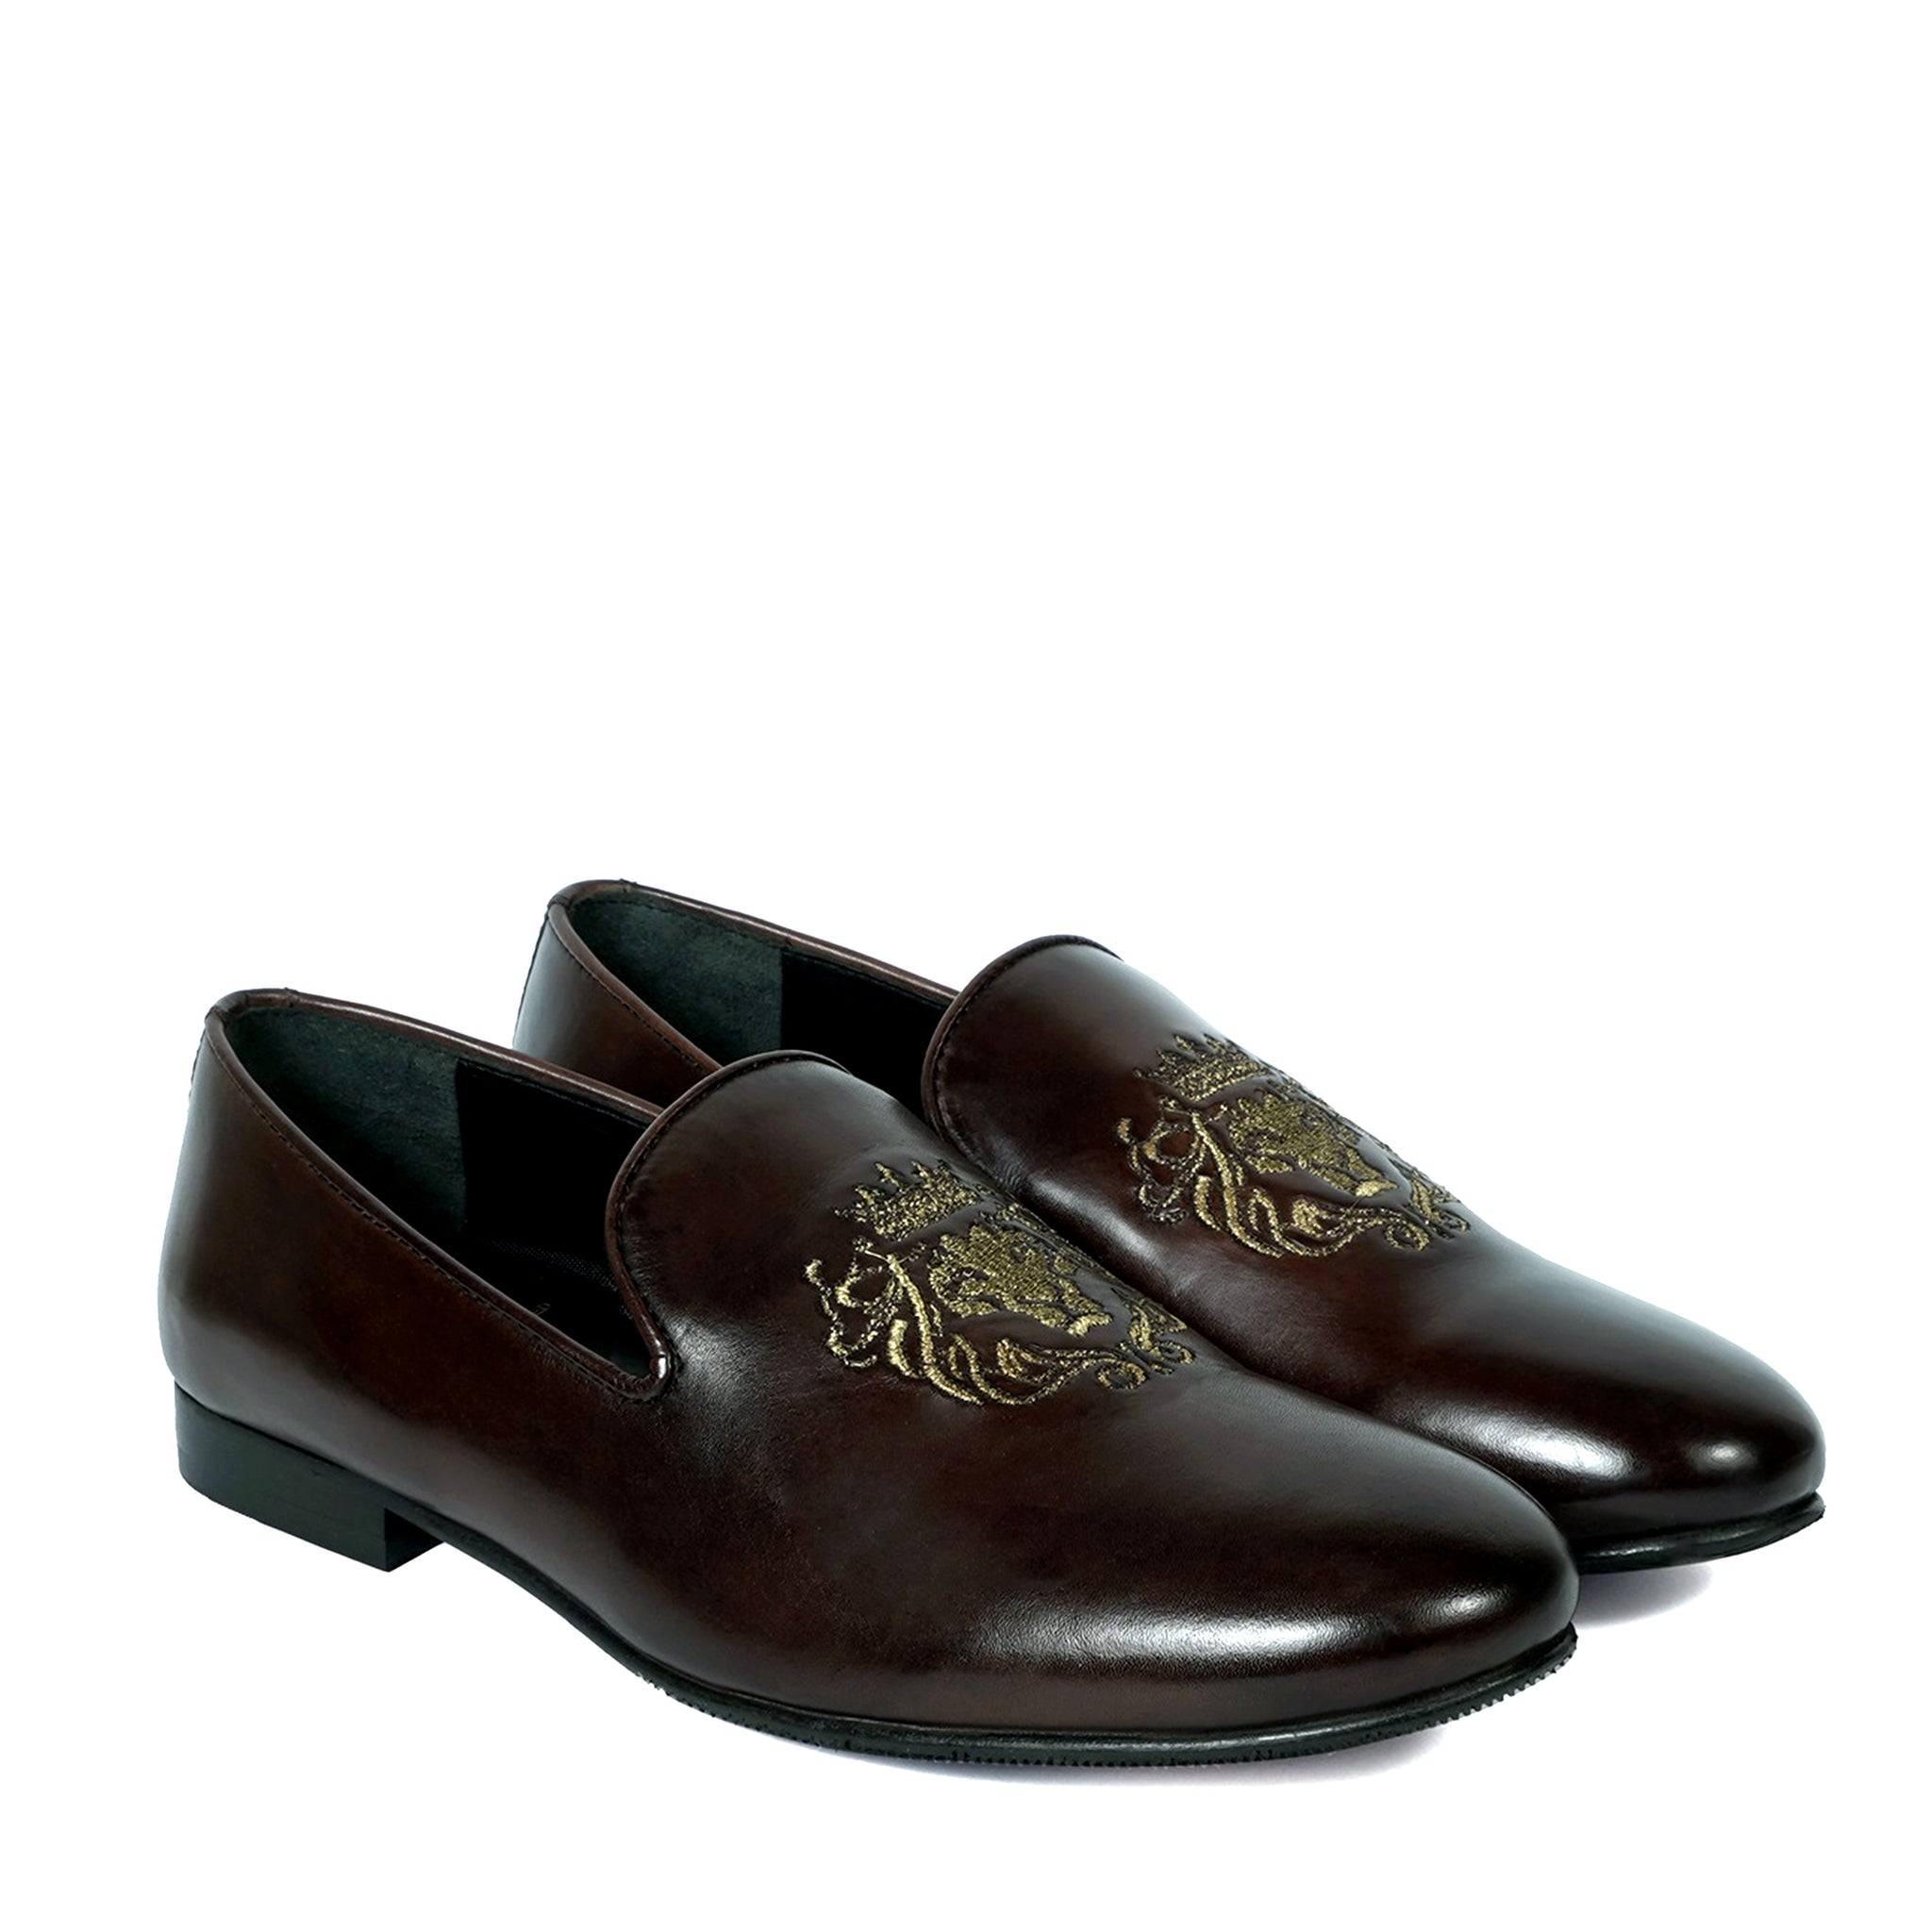 Dark Brown Leather Slip-On Shoes with Golden Lion King Embroidery By Brune & Bareskin